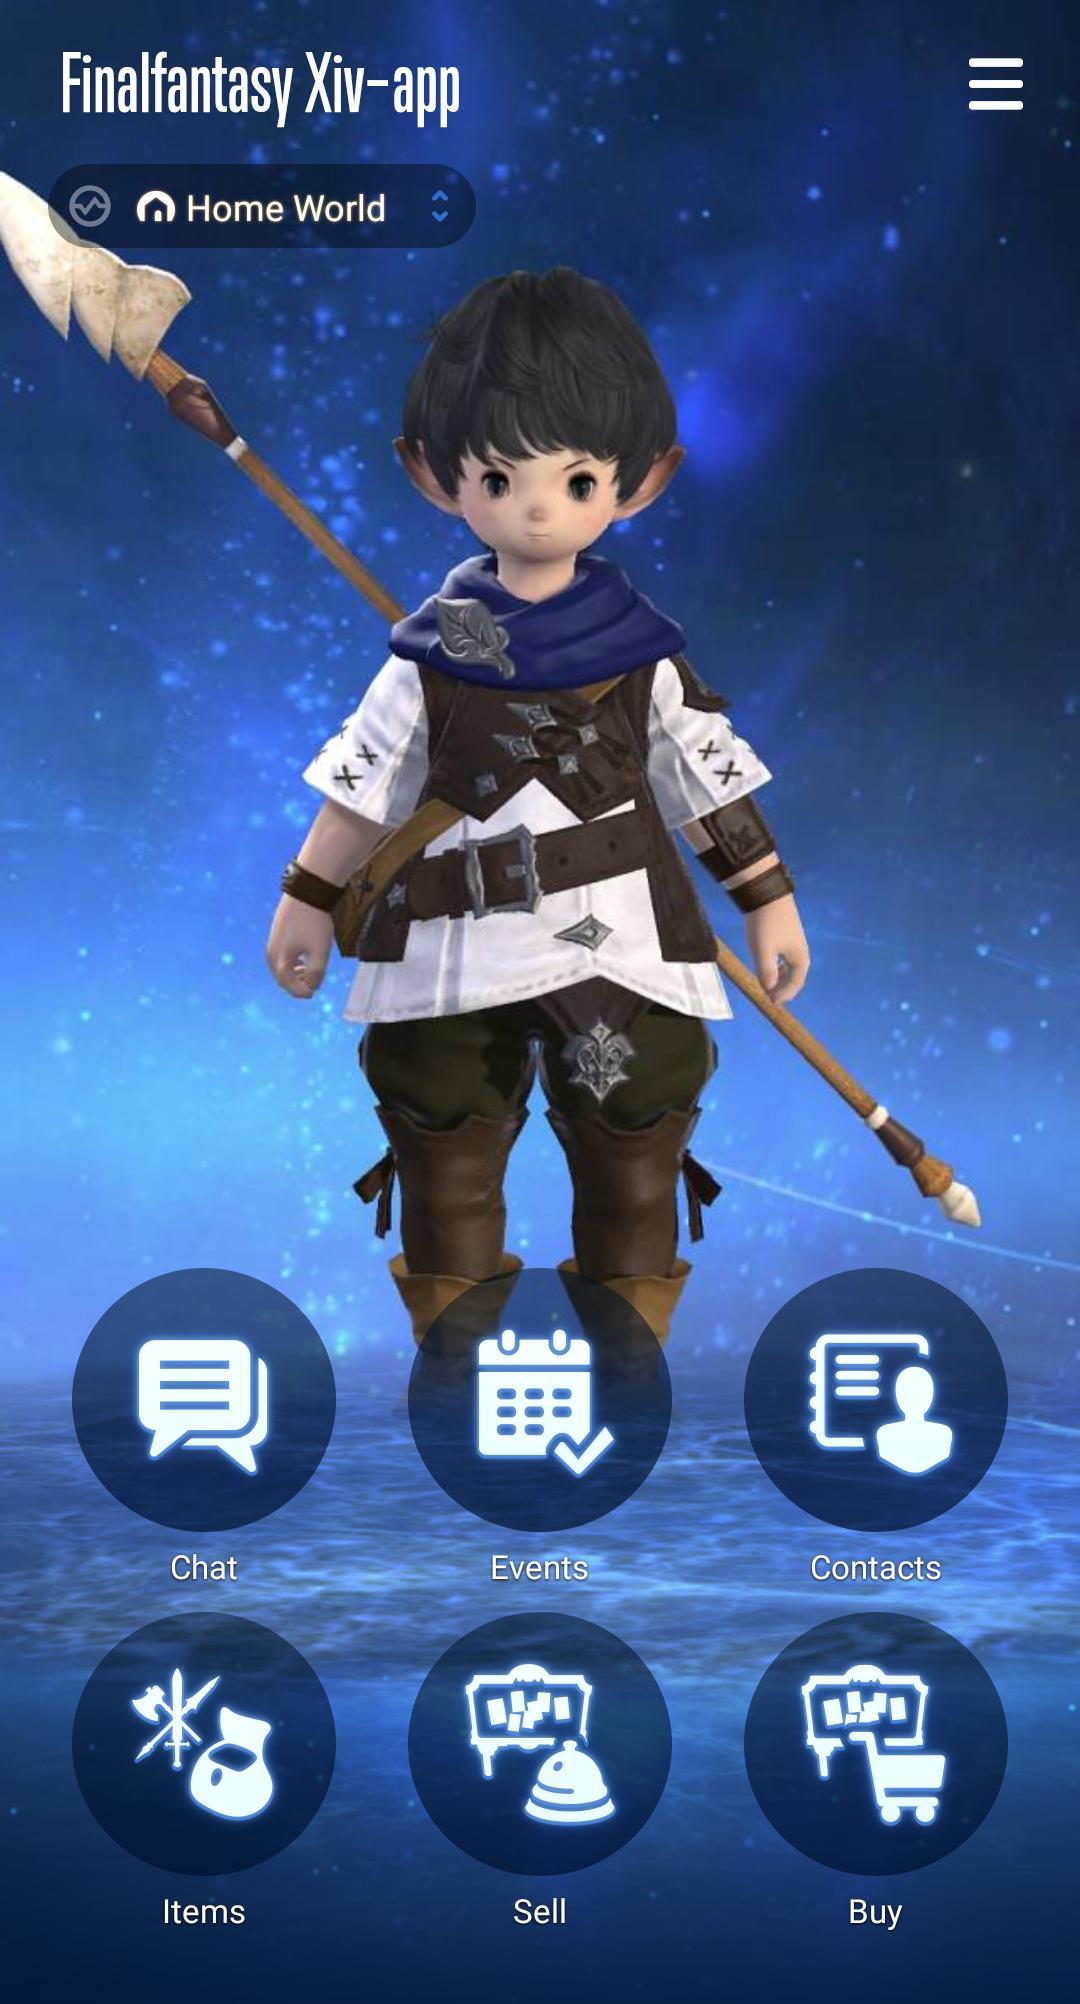 Final Fantasy Xiv Companion Apk For Android Download